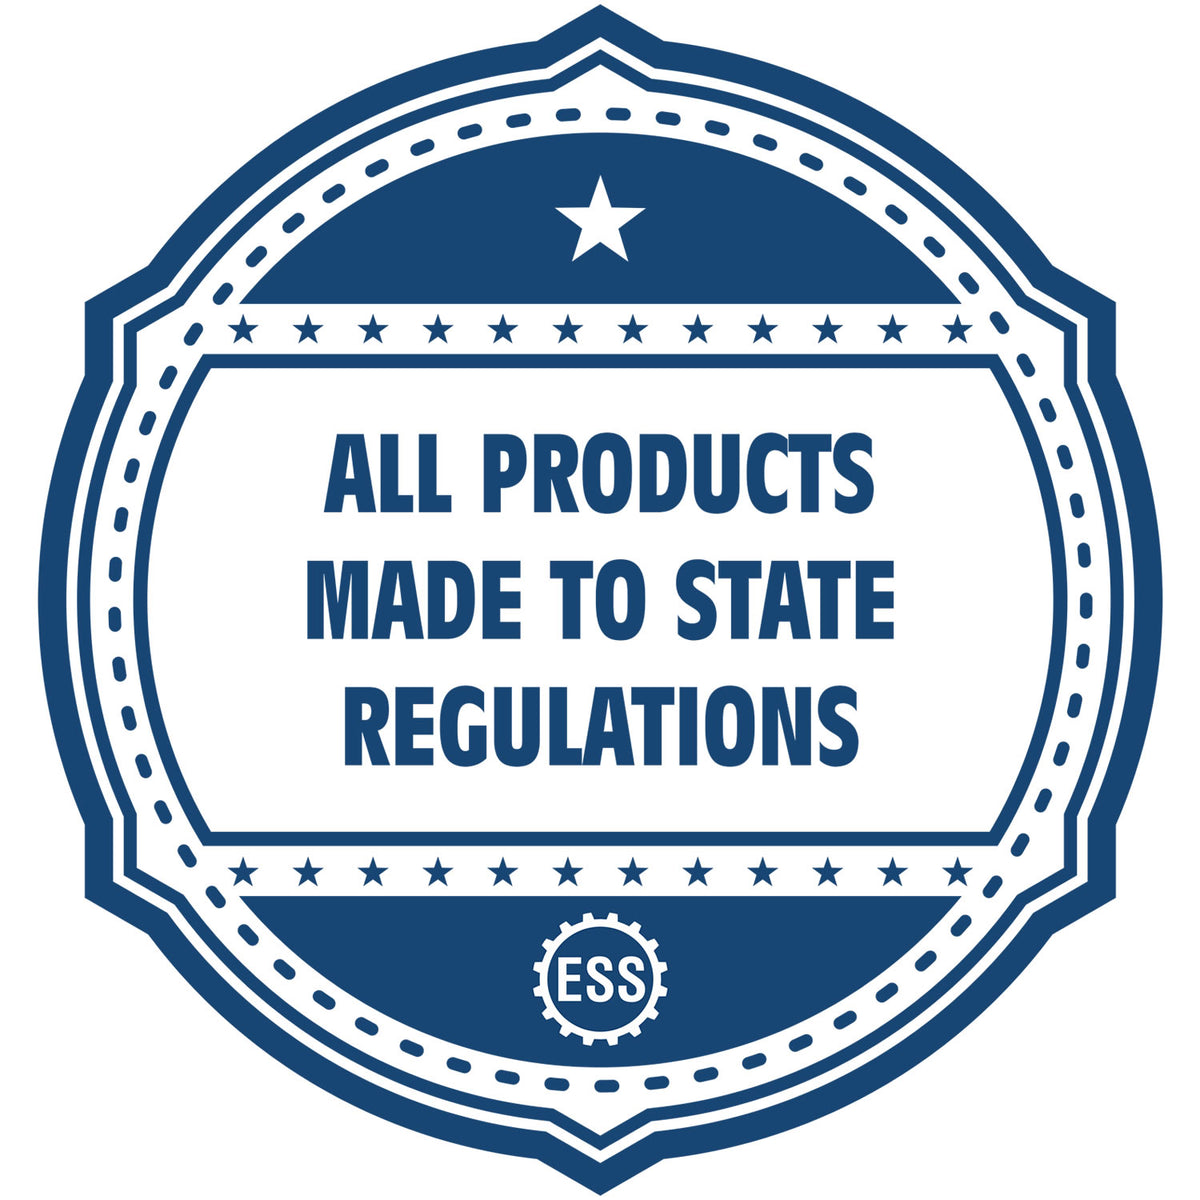 An icon or badge element for the Self-Inking Michigan PE Stamp showing that this product is made in compliance with state regulations.